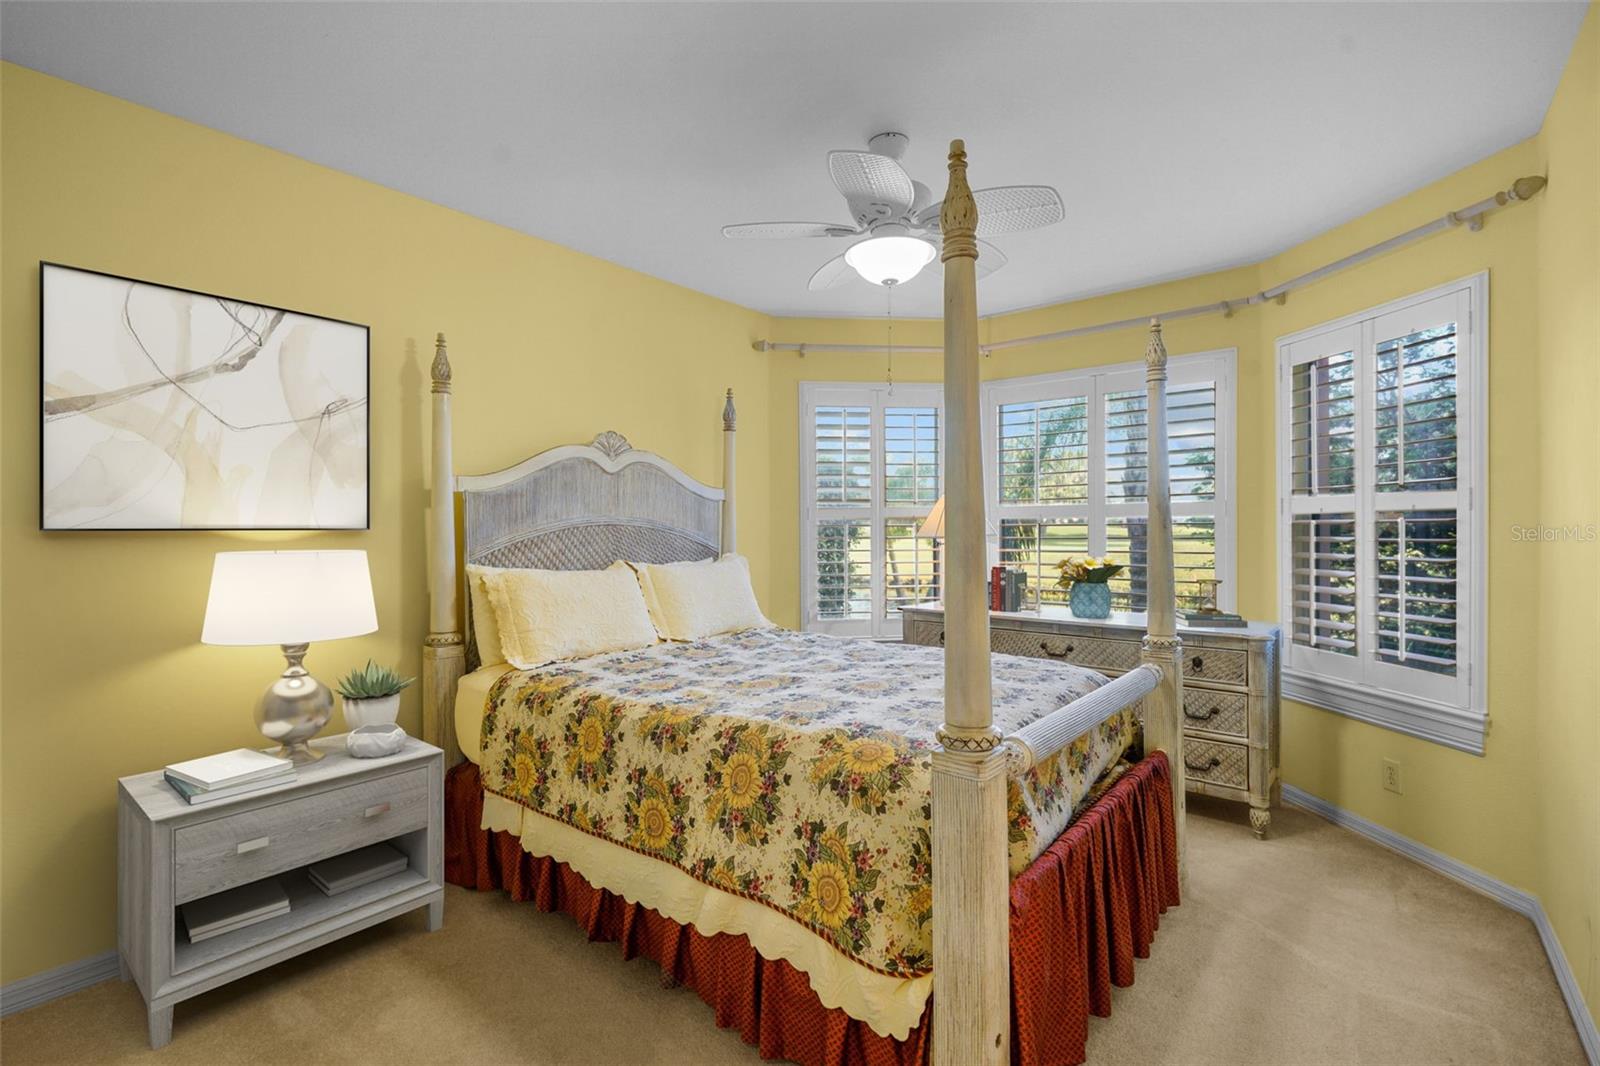 Bedroom 4 staged w/view of golf course and pond